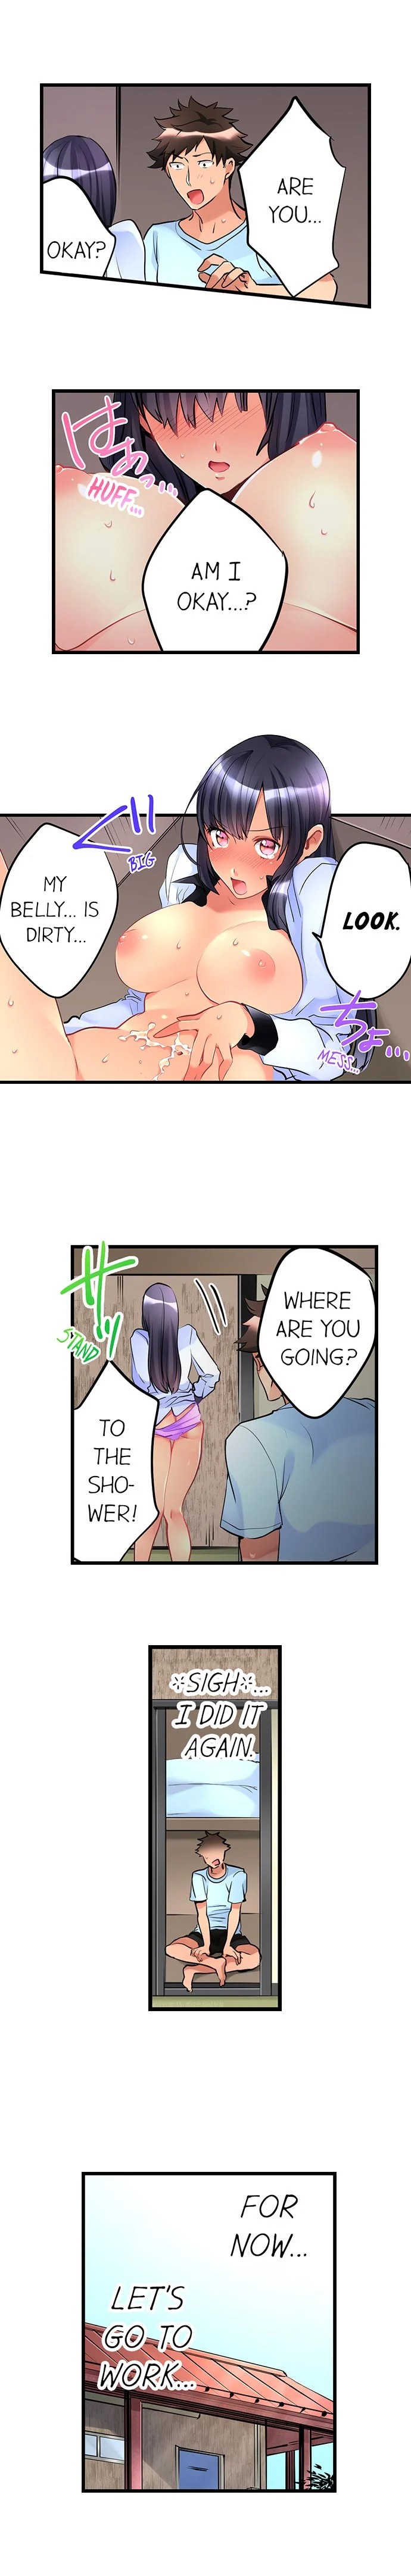 What She Fell On Was The Tip Of My Dick - Chapter 9 Page 3